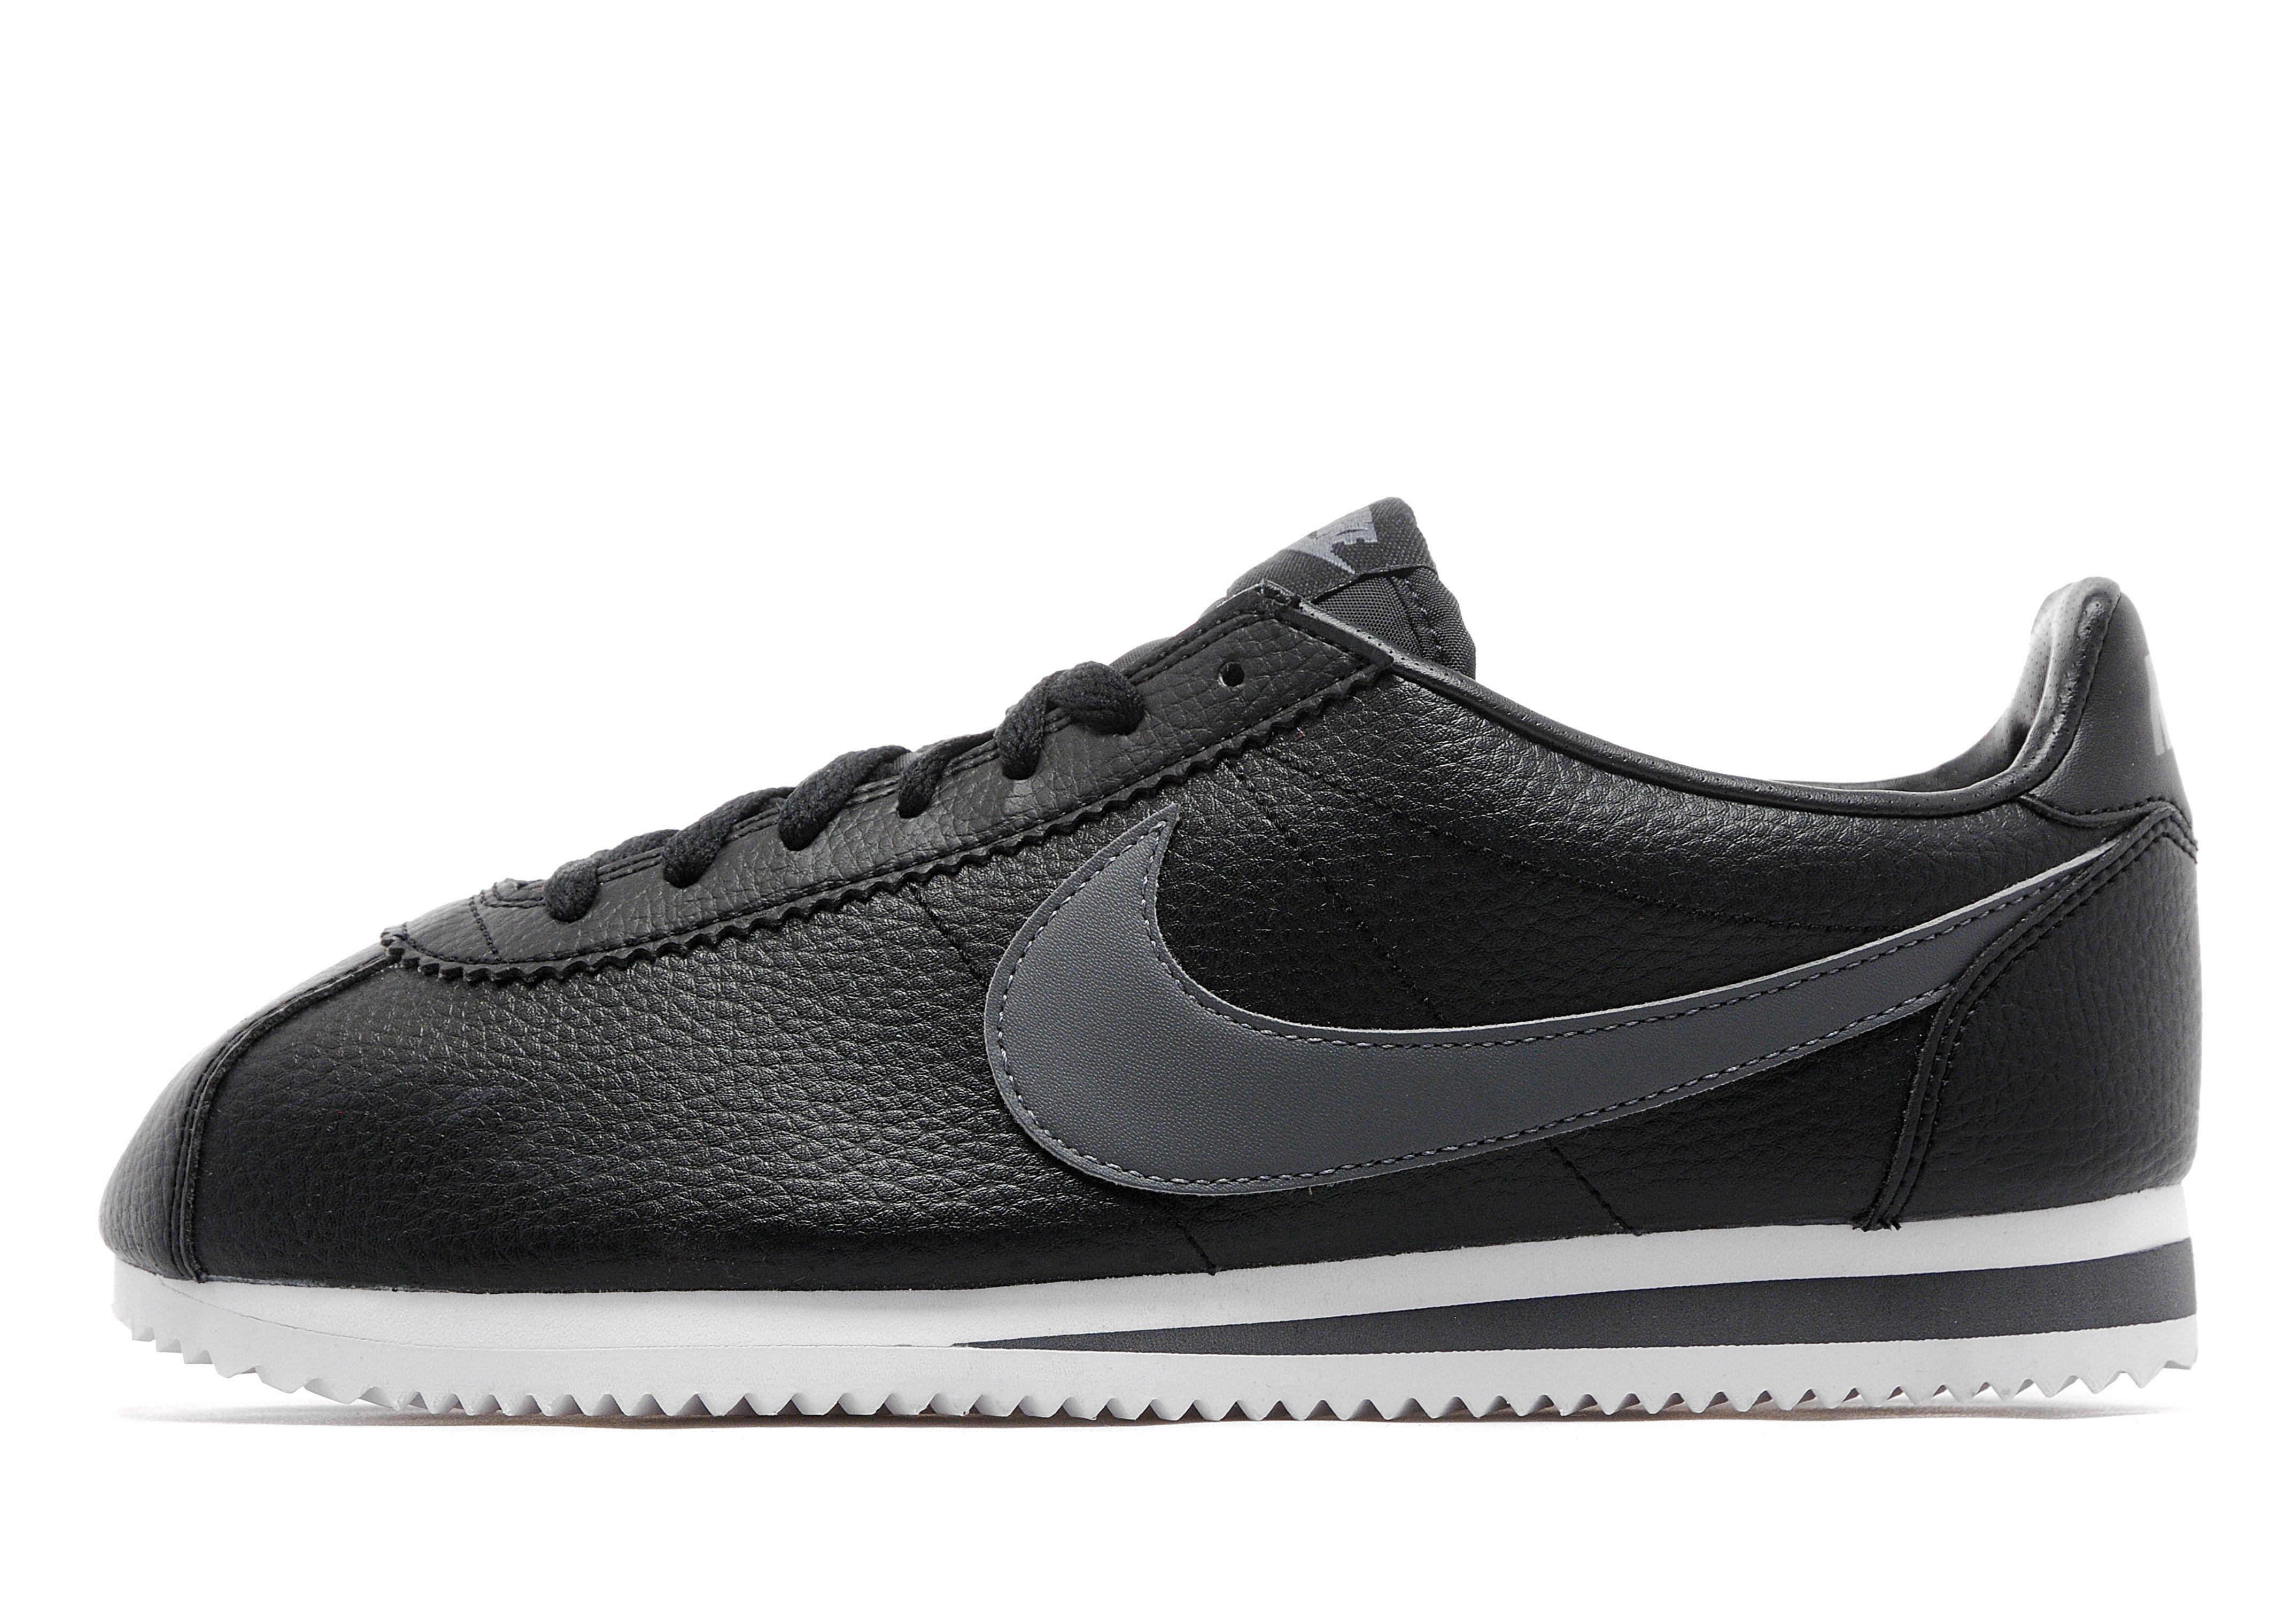 Nike Classic Cortez Leather in Black for Men - Lyst